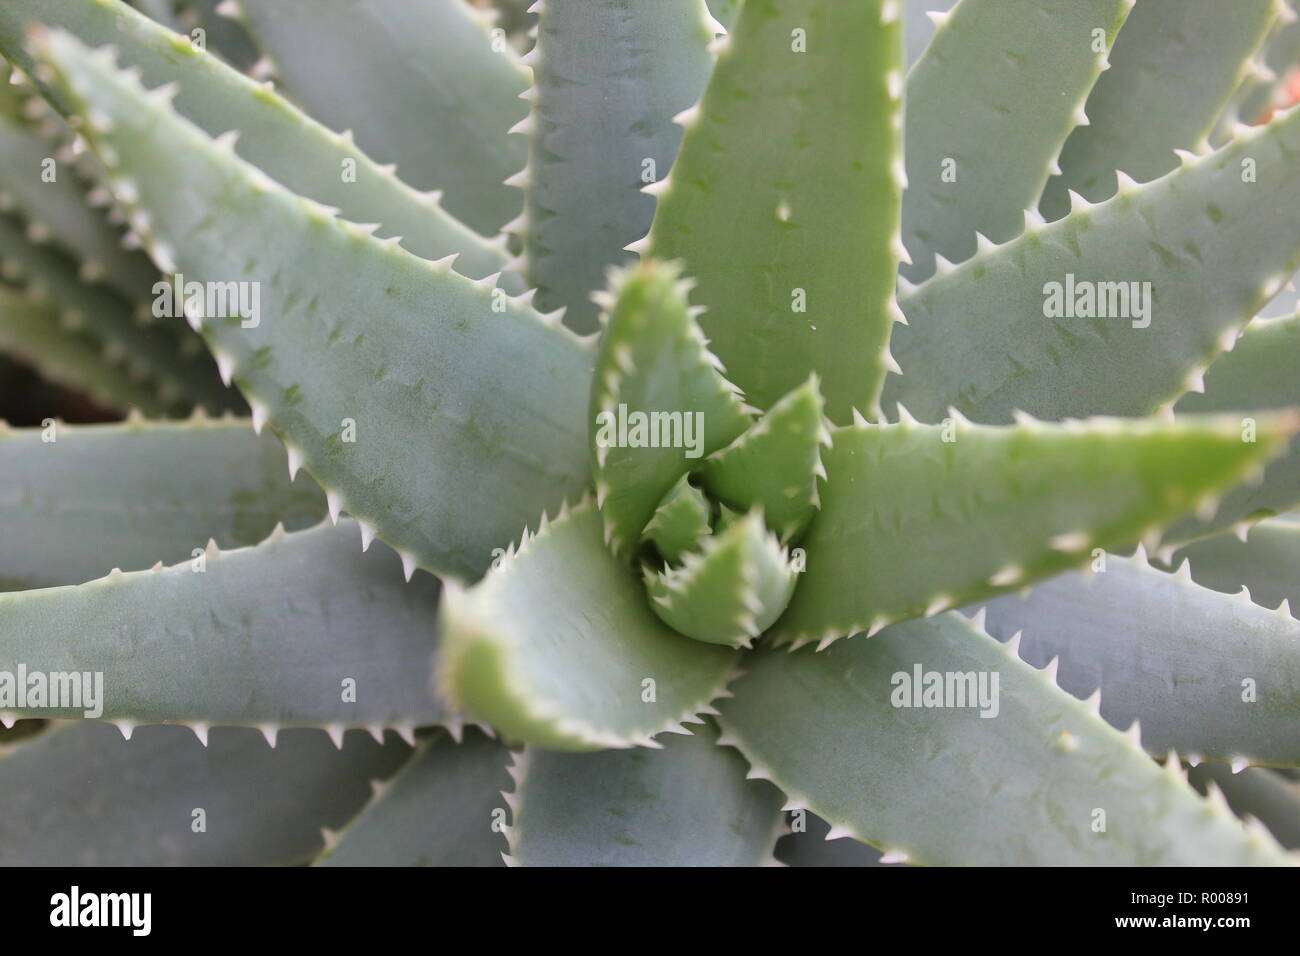 Standard And Ubiquitous Beautiful And Flawless Aloe Vera Plant